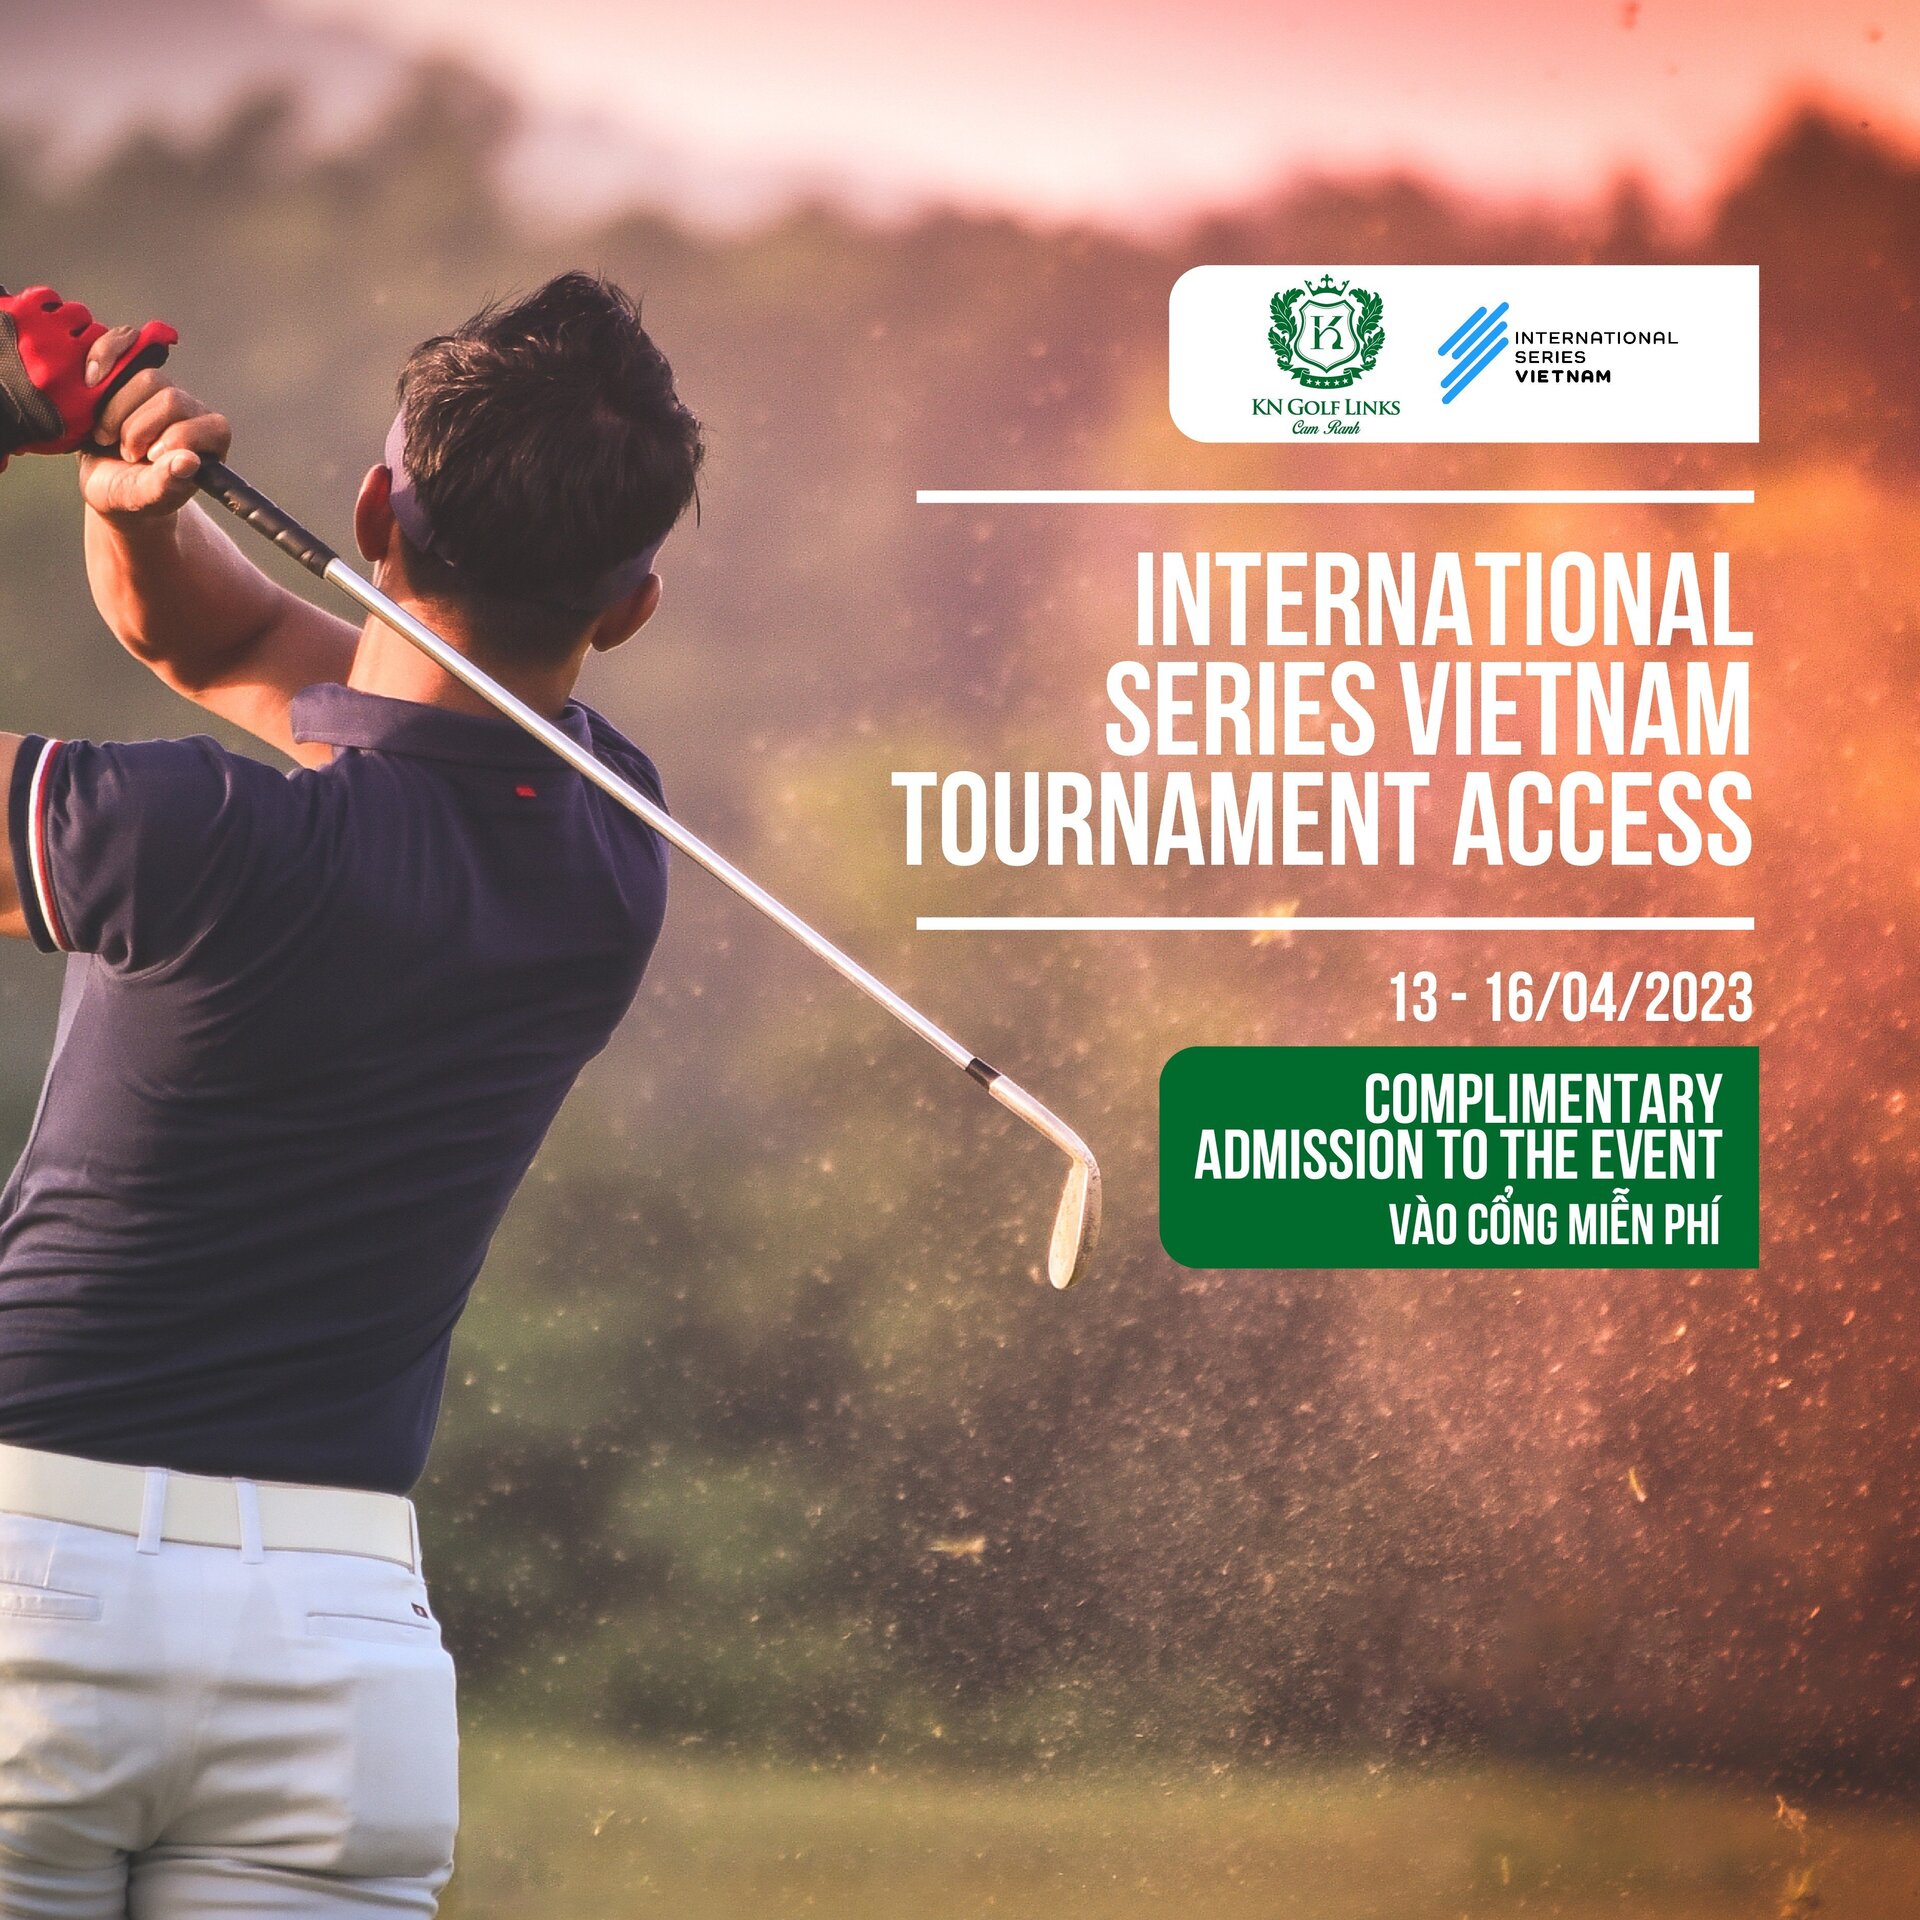 Register for free entry to The International Series Vietnam tournament.